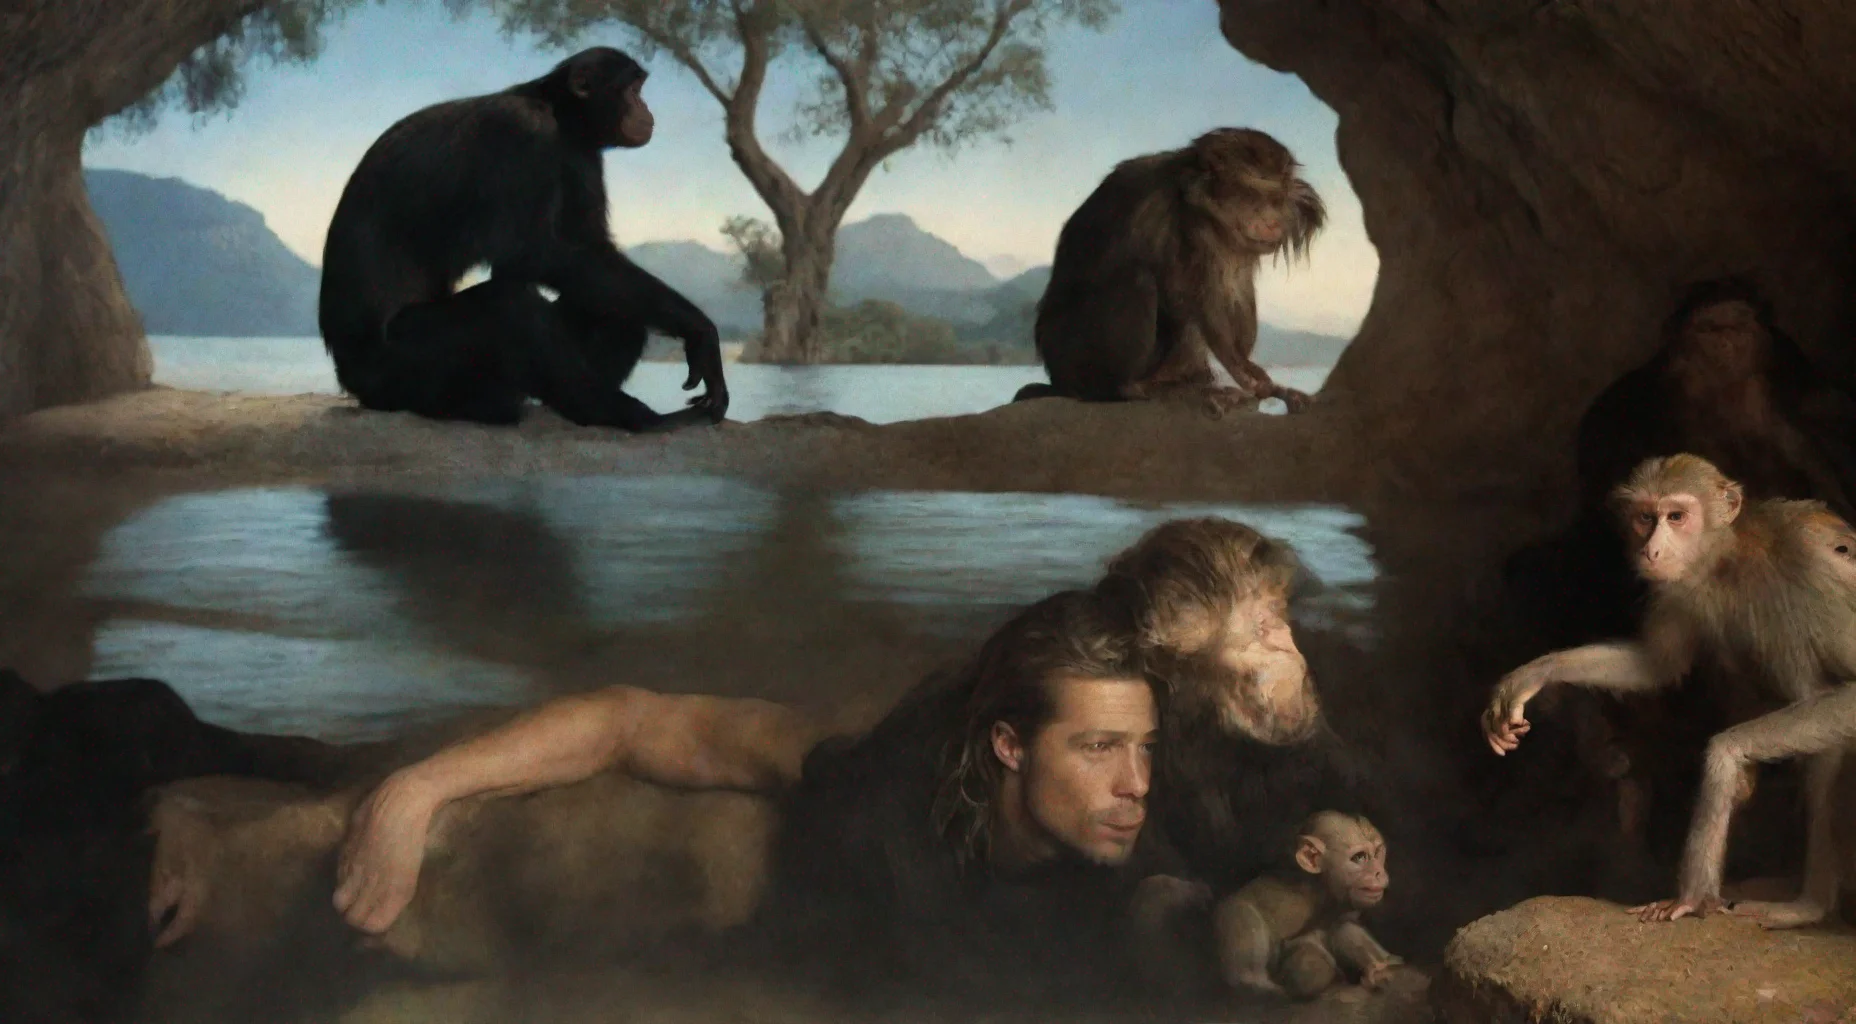 aiamazing brad pitt in cave with monkeys awesome portrait 2